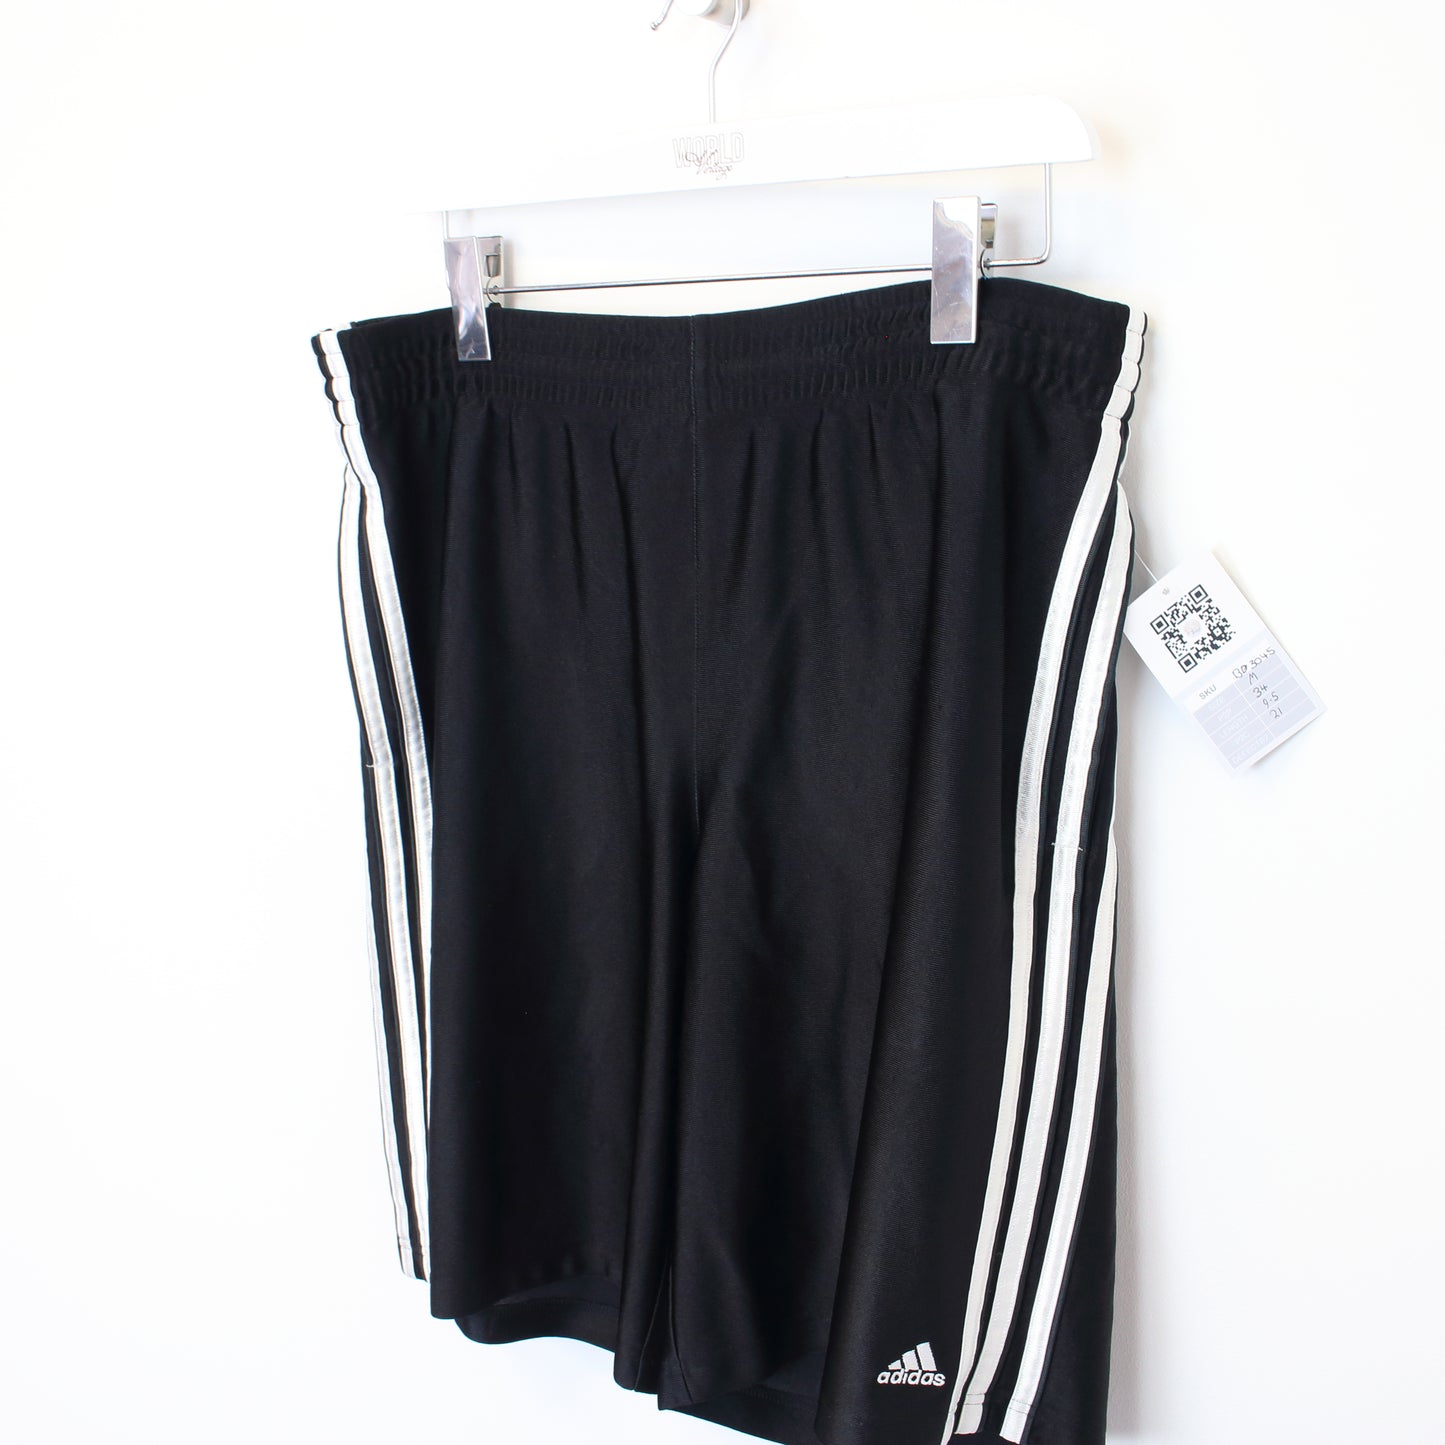 Vintage Adidas shorts in black and white. Best fits L